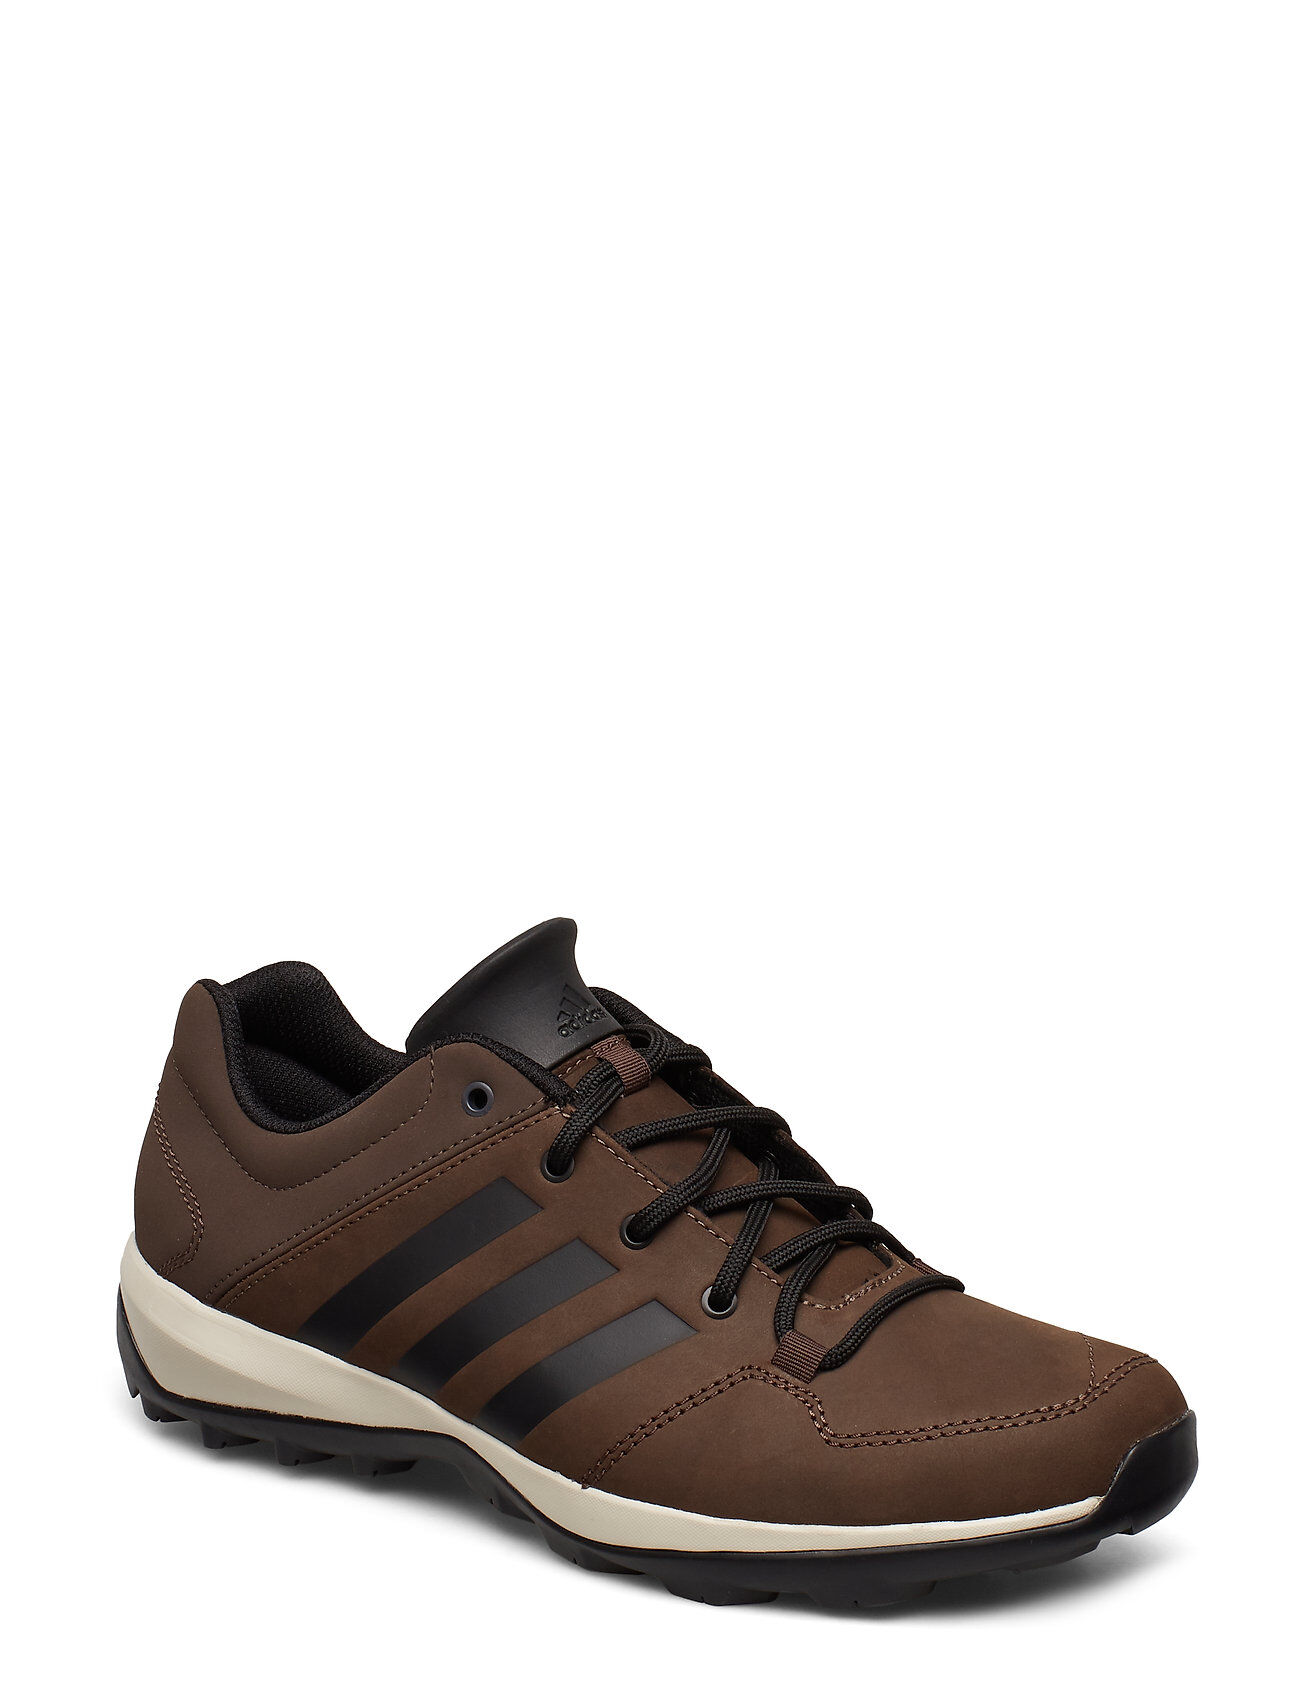 adidas Performance Terrex Daroga Plus Leather Hiking Shoes Sport Shoes Outdoor/hiking Shoes Brun Adidas Performance